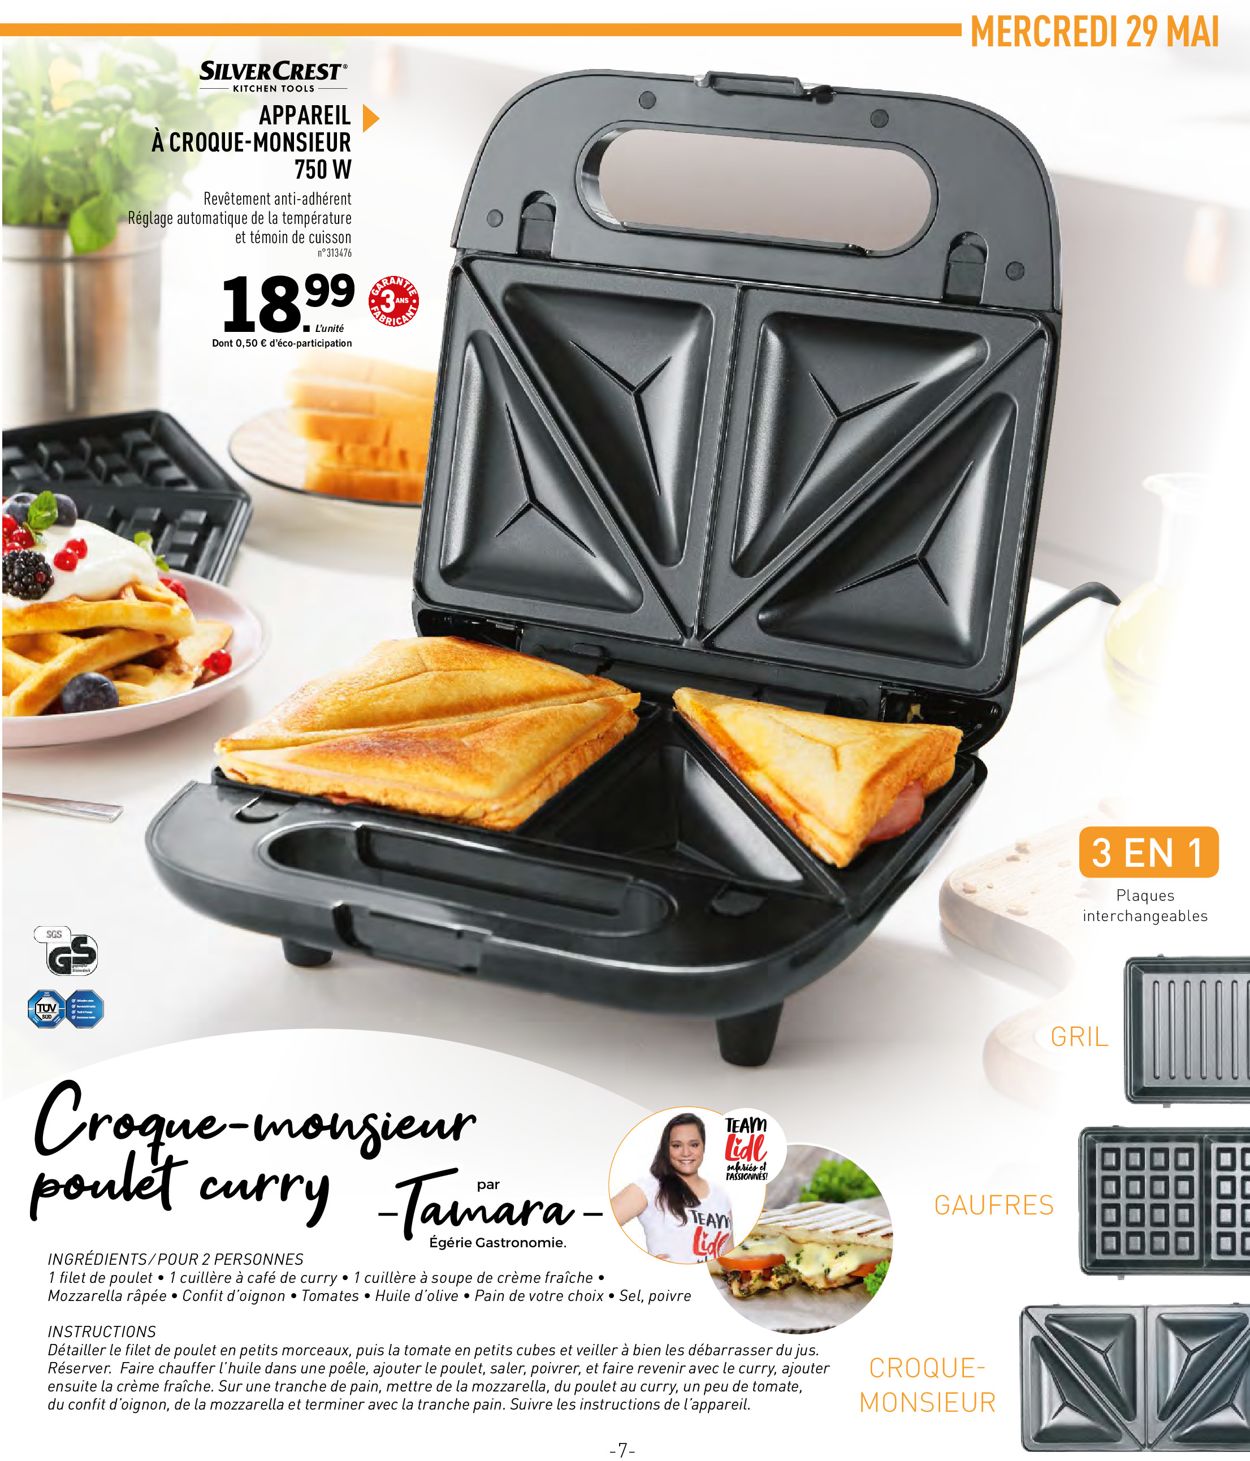 Lidl Catalogue - 29.05-13.06.2019 (Page 7)